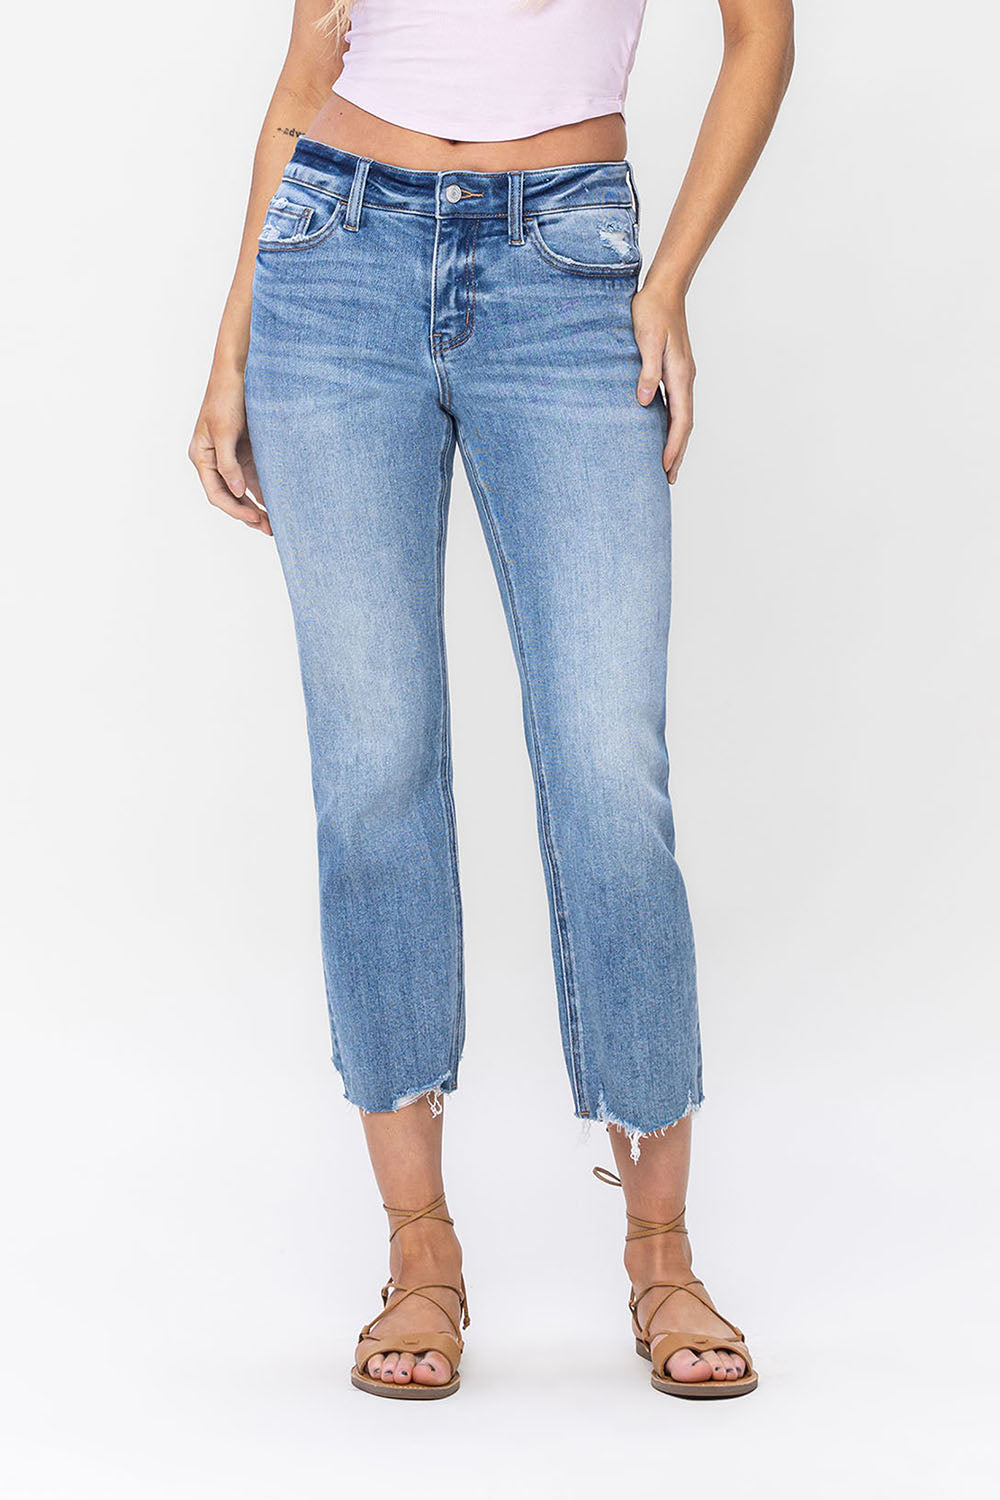 Genovese Mid Rise Regular Cropped Straight Jeans by Lovervet